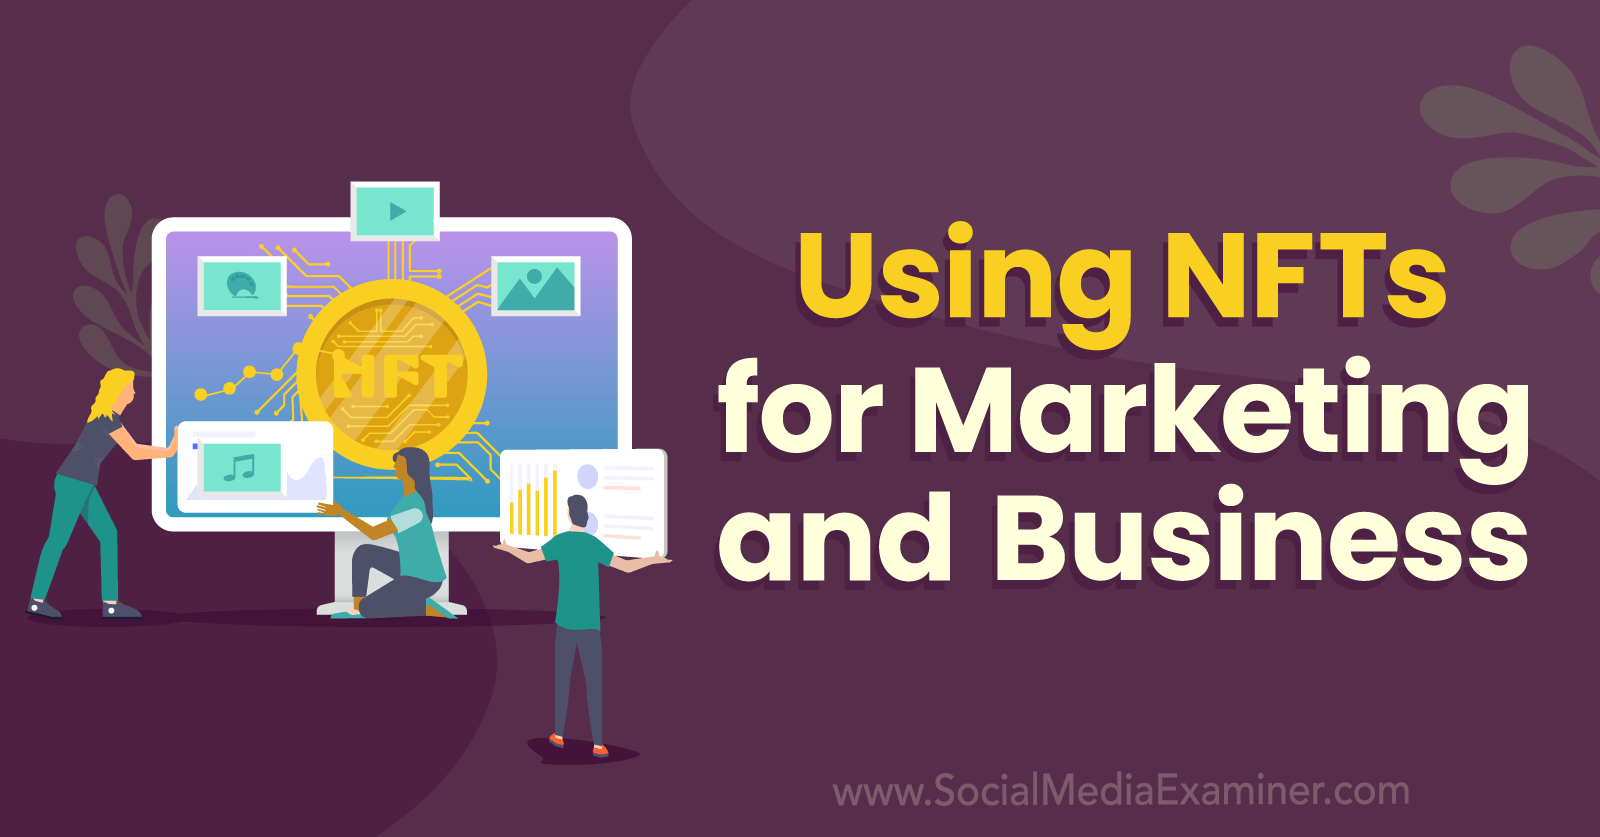 Using NFTs for Marketing and Business-Social Media Examiner